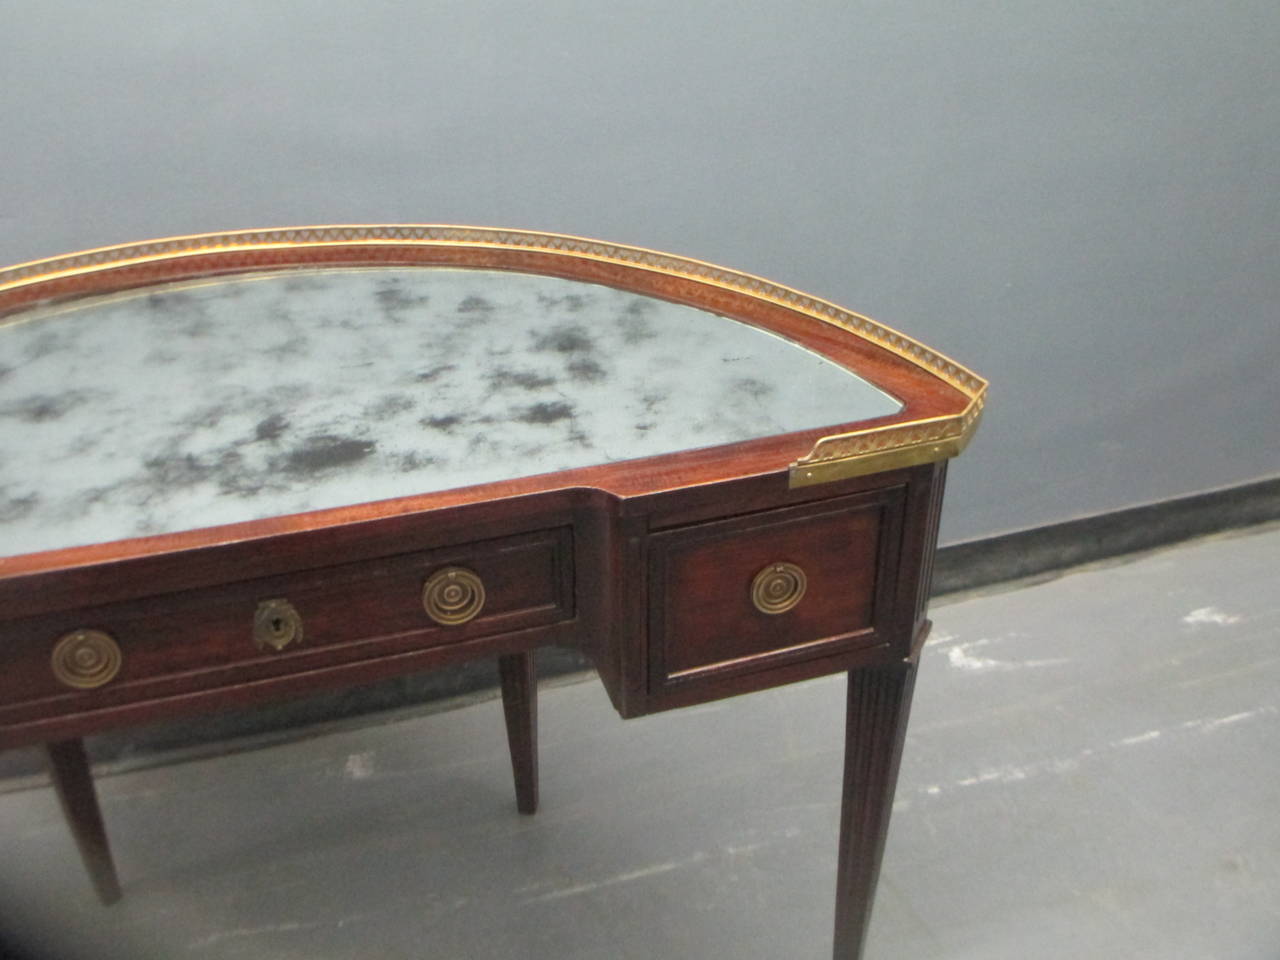 French Demilune Louis XVI Style Mirrored-Top Writing Desk